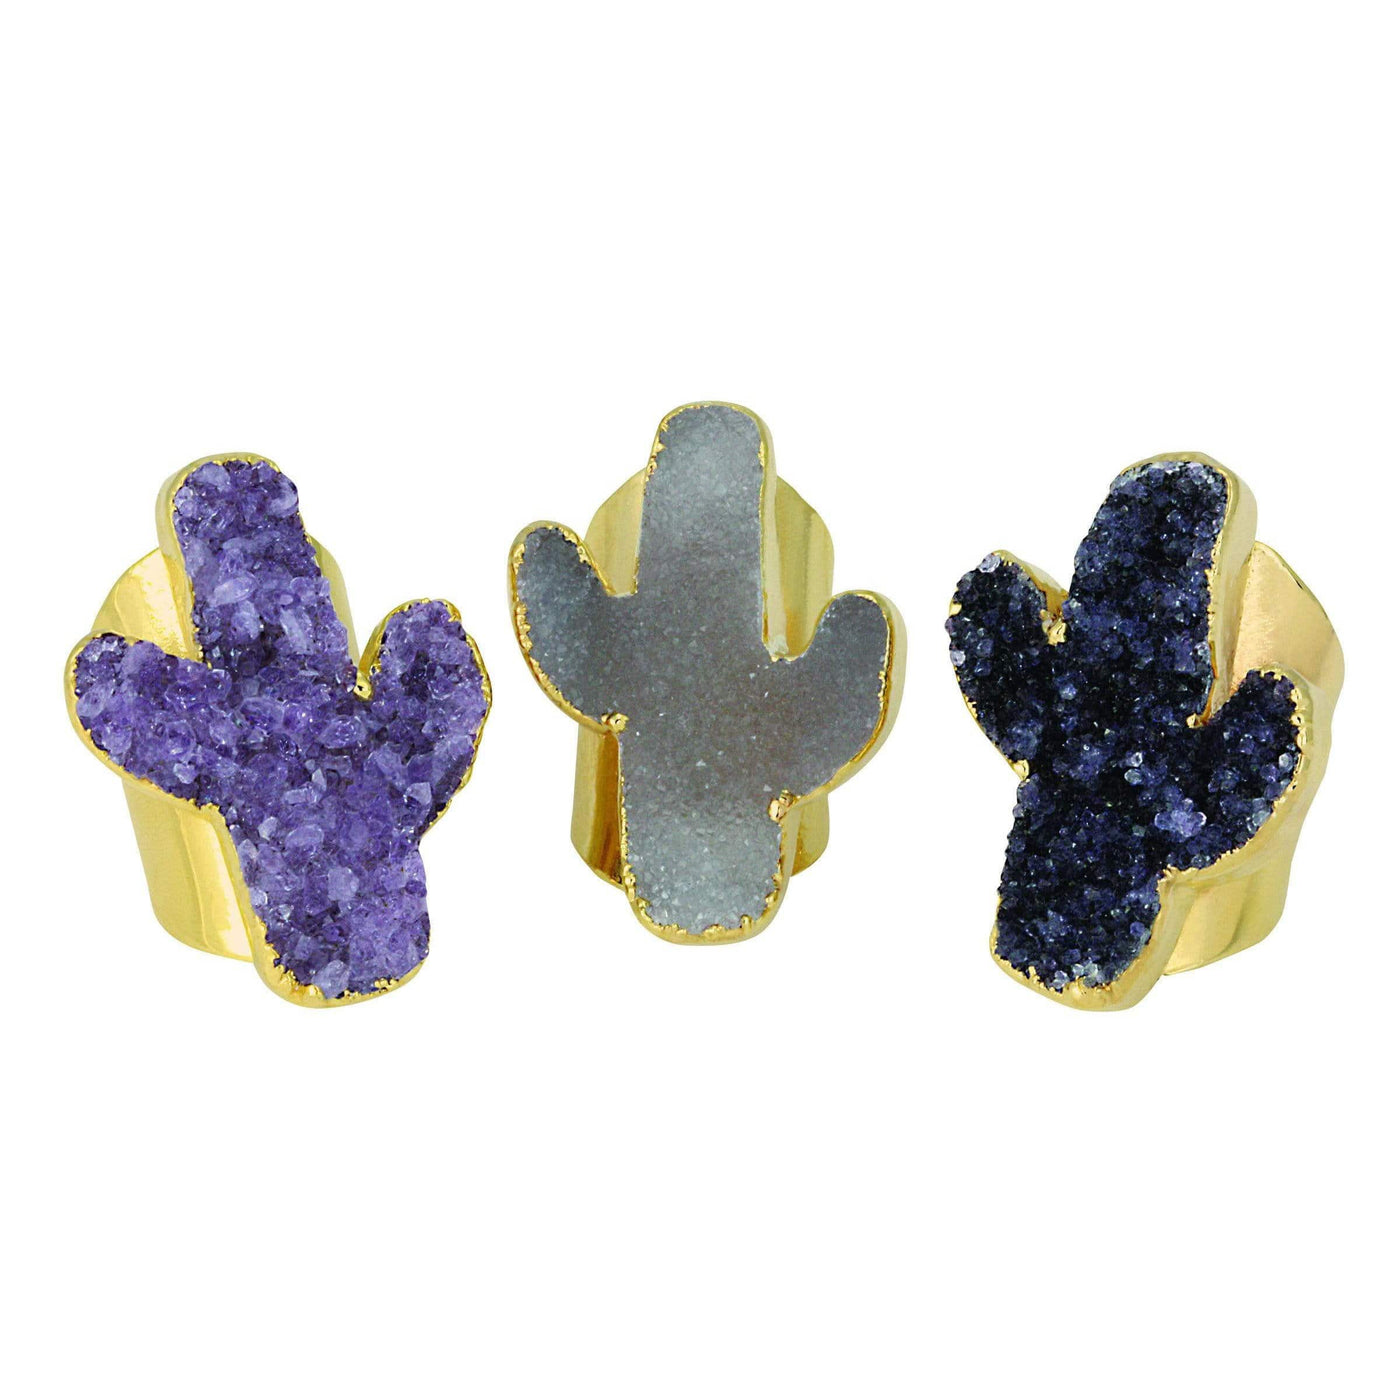 3 Druzy Cactus Ring with 24k Gold Electroplated Cigar Band displayed on white background showing various shades of purples gray white tones